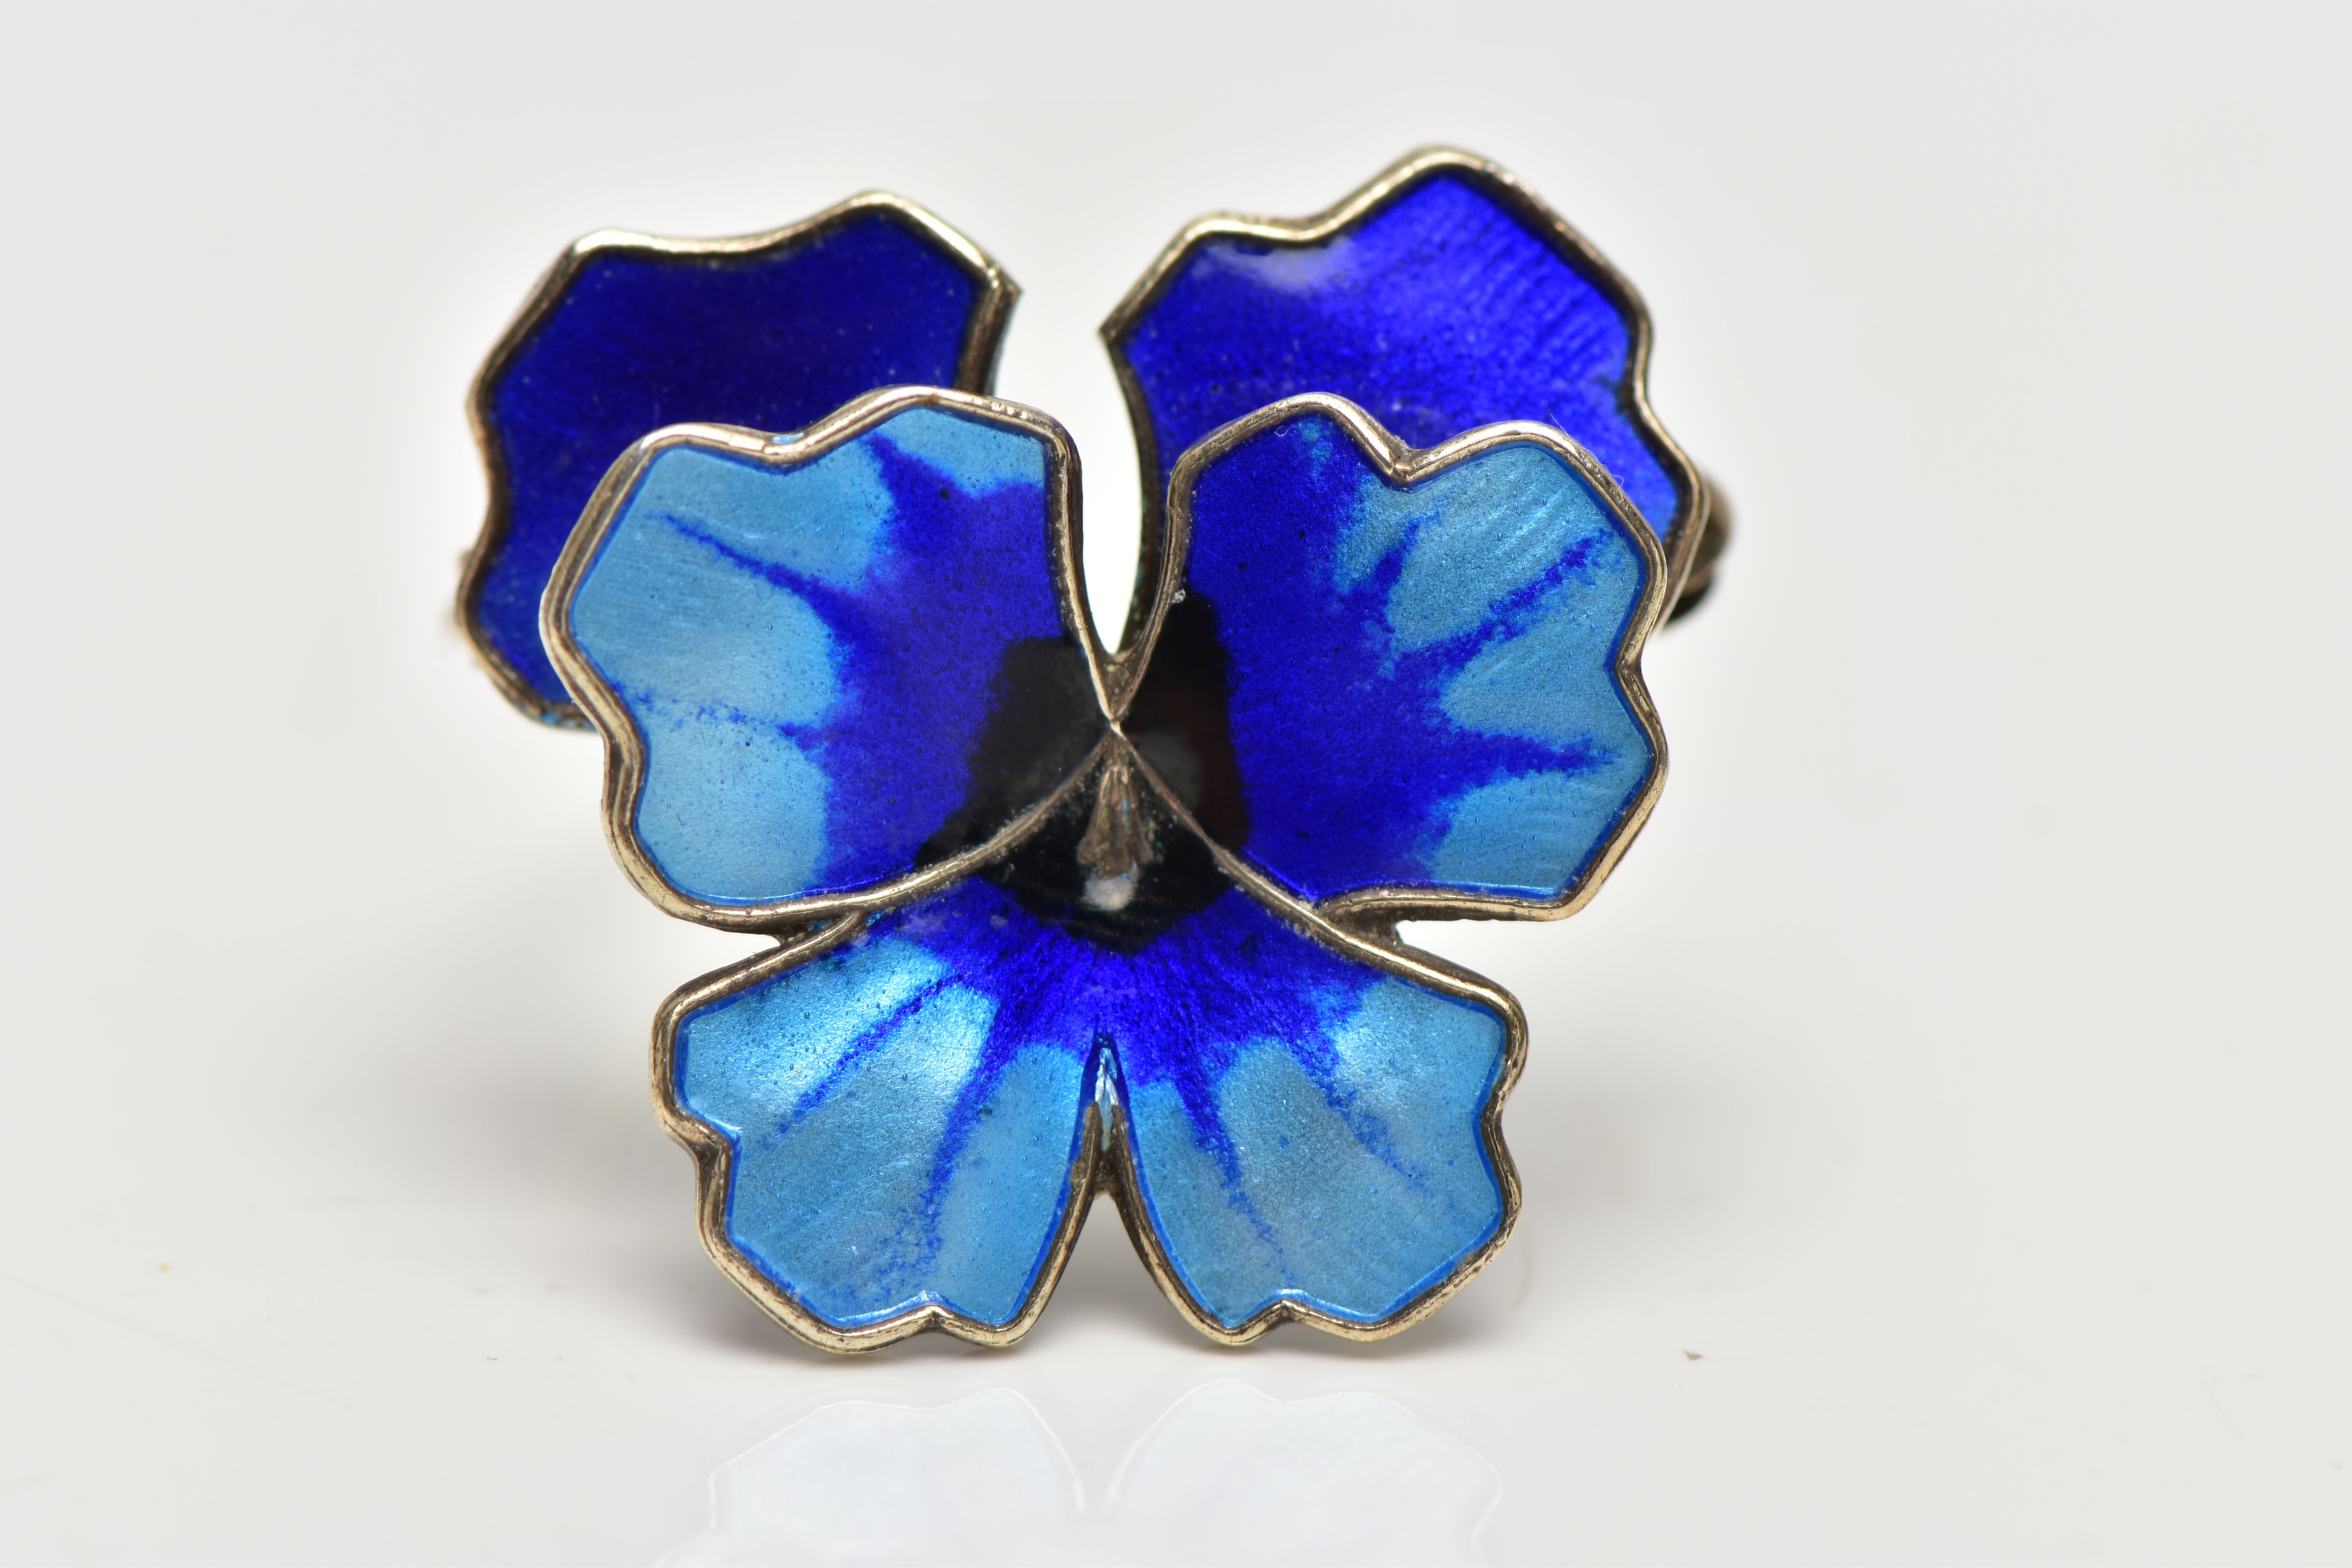 A 'DAVID ANDERSON' NORWEIGEN ENAMEL PANSY BROOCH, featuring a light and dark blue guilloche